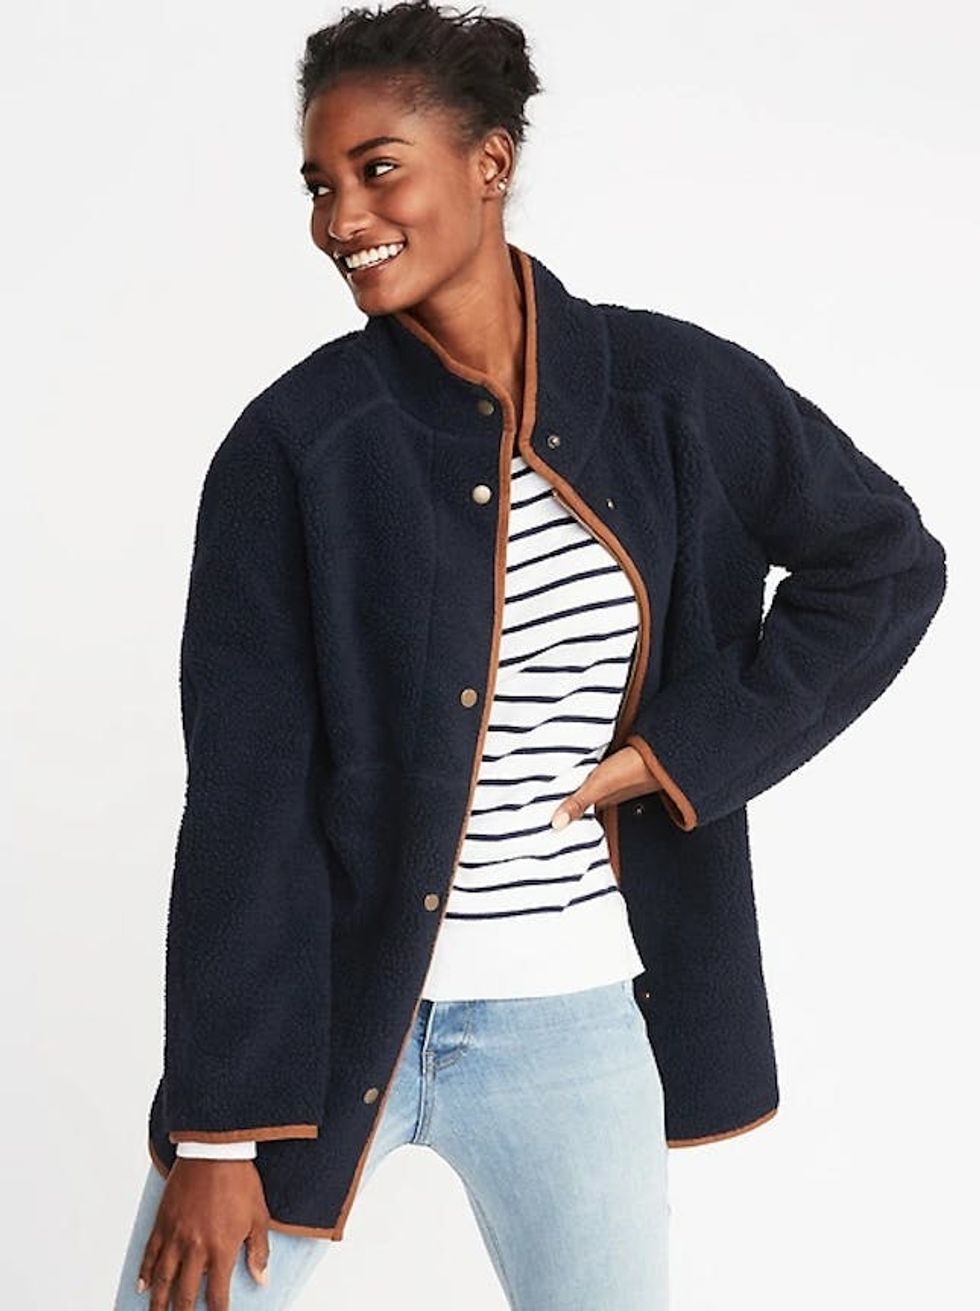 24 Cozy Coats to Wear When Winter Starts Creeping in - Brit + Co